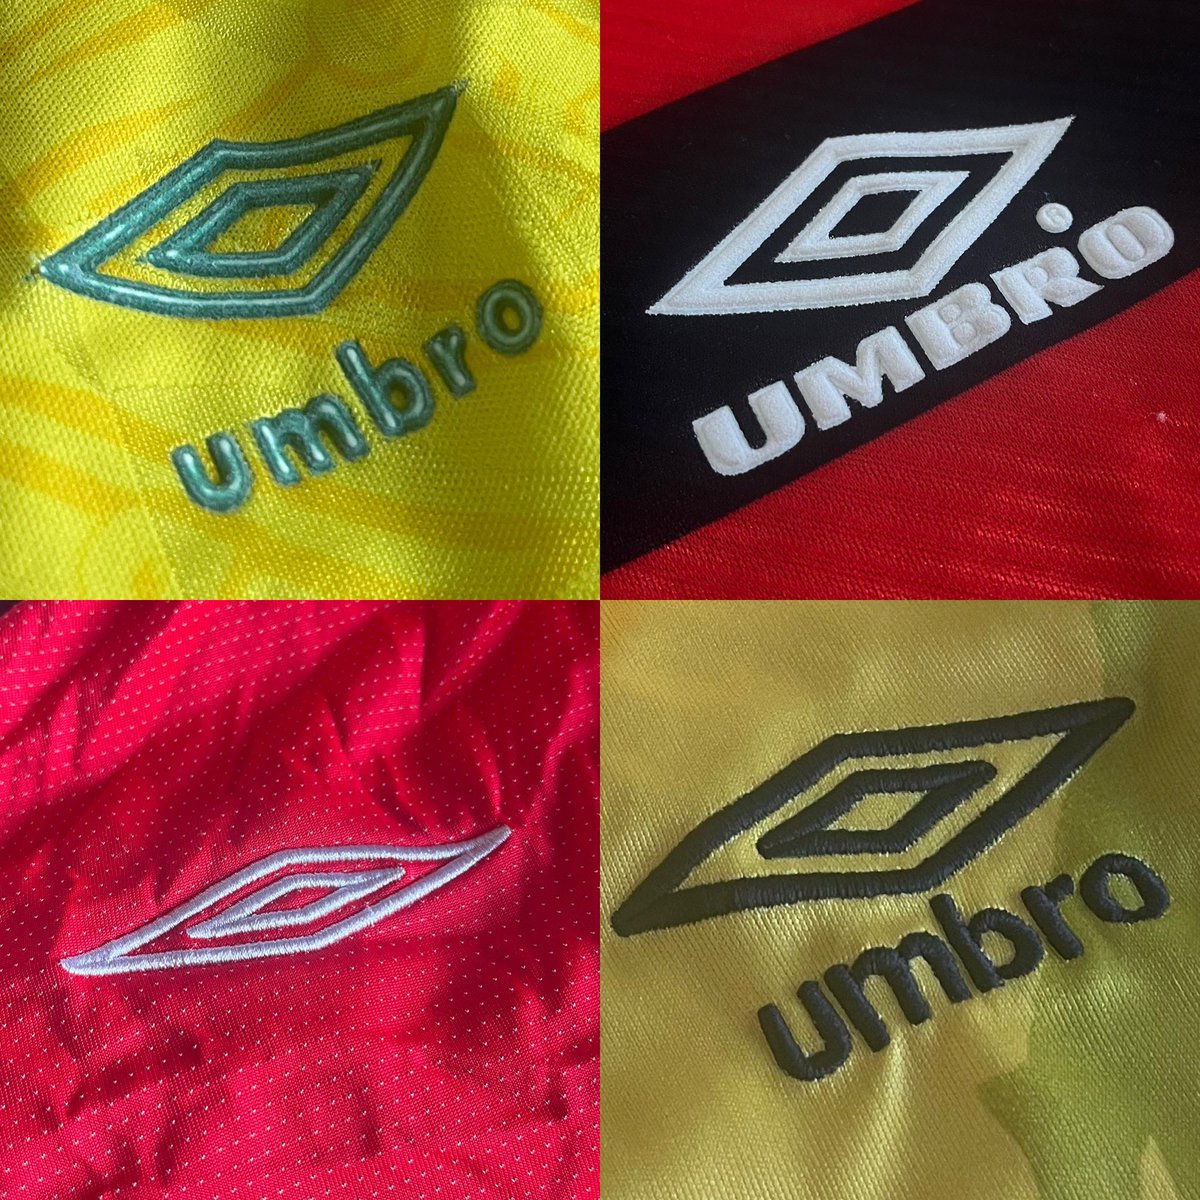 Have four 💎💎 logo designs - someone must have completed the set? #Umbro #AlwaysUmbroSince1924